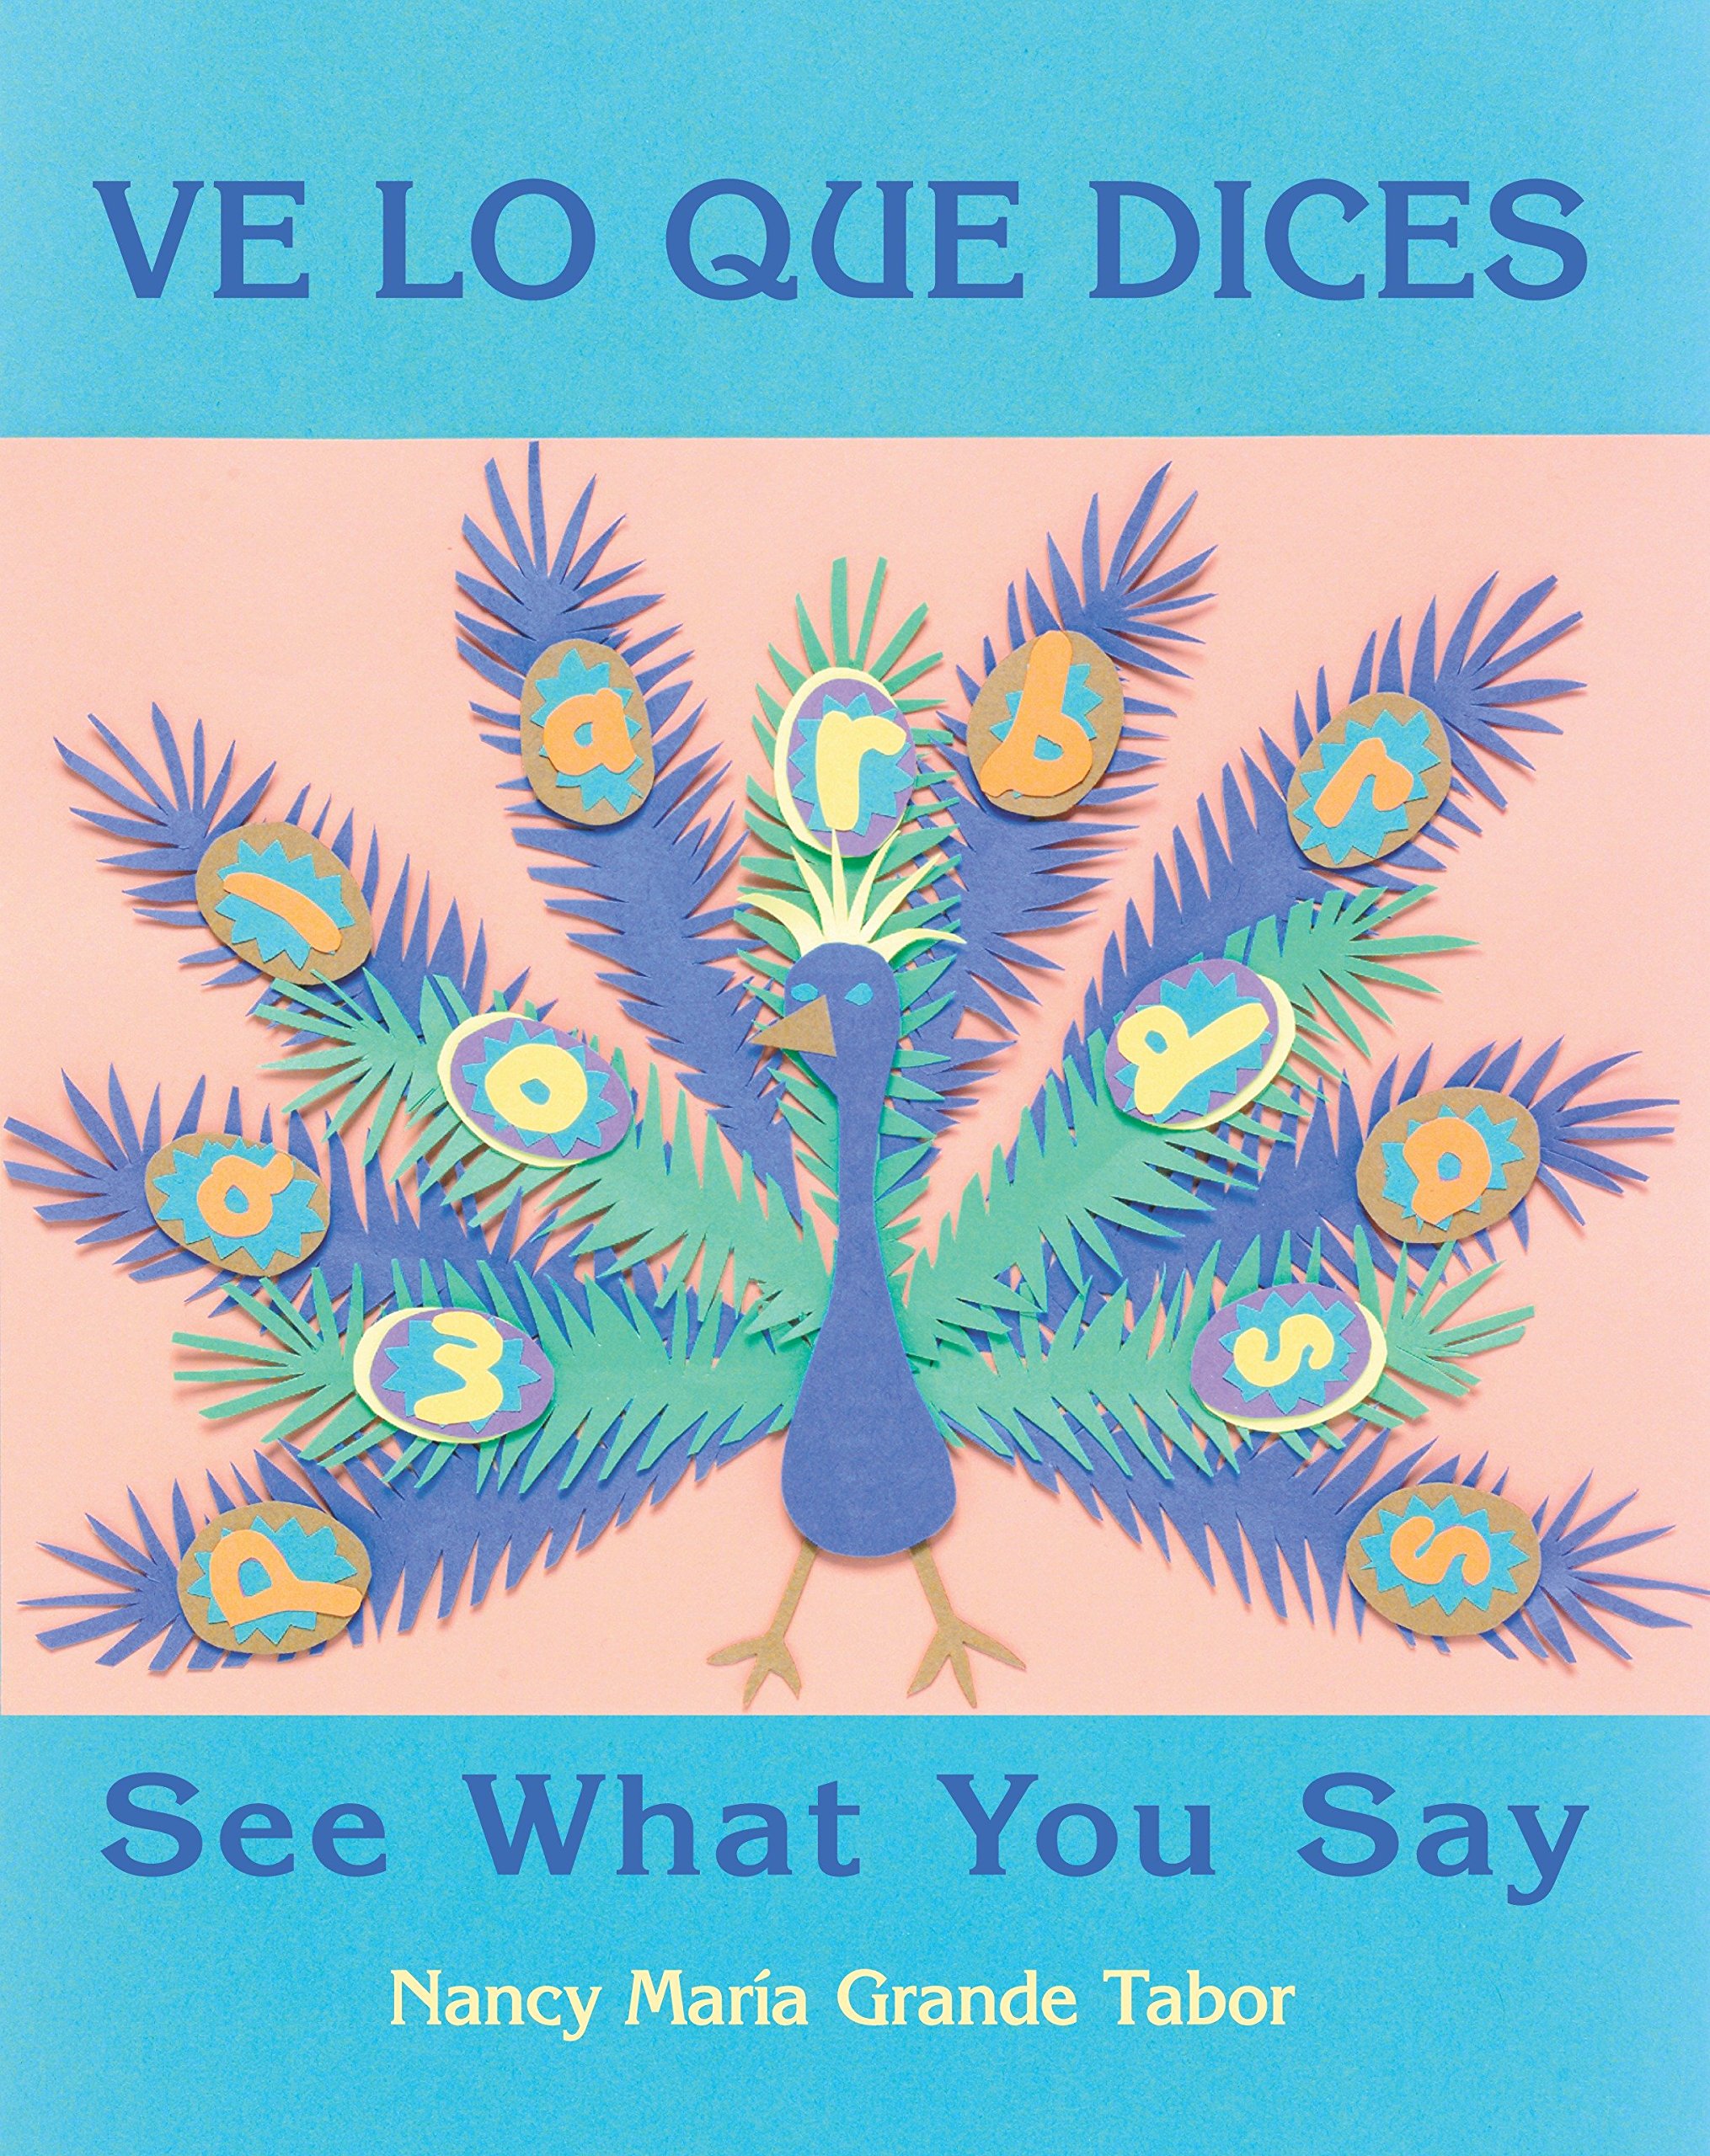 See What You Say / Ve lo que dices